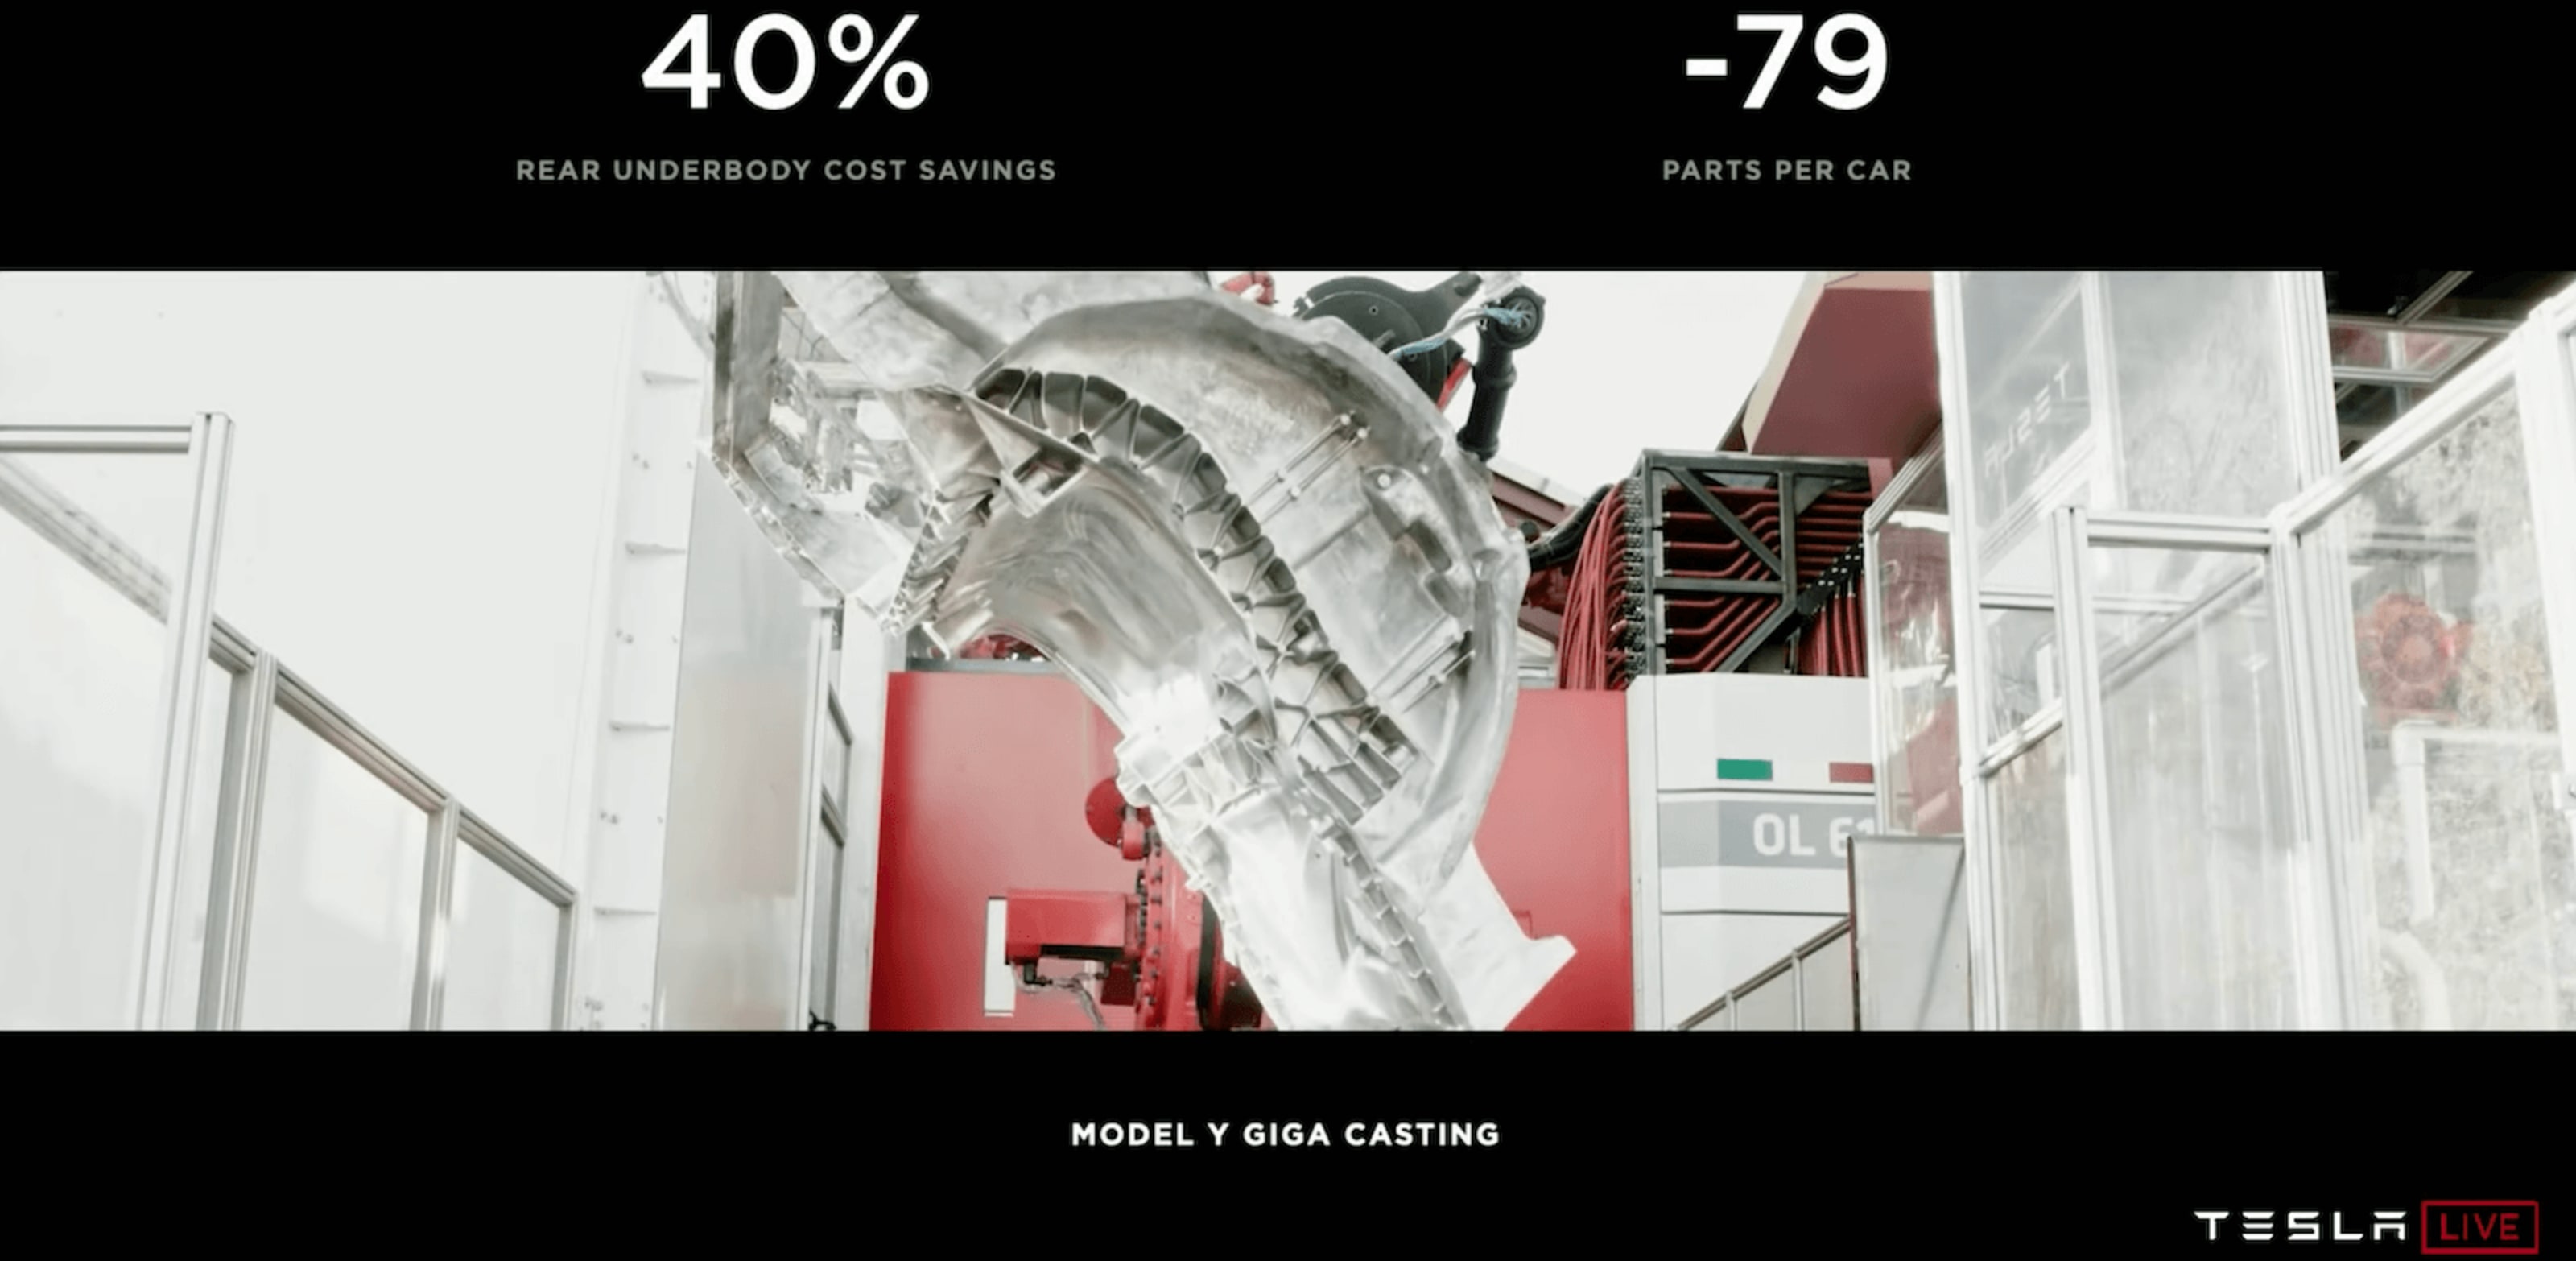 Screenshot of a tesla livestream showing the model y giga casting machine with the words "40% rear underbody cost savings" and "-79 parts per car"